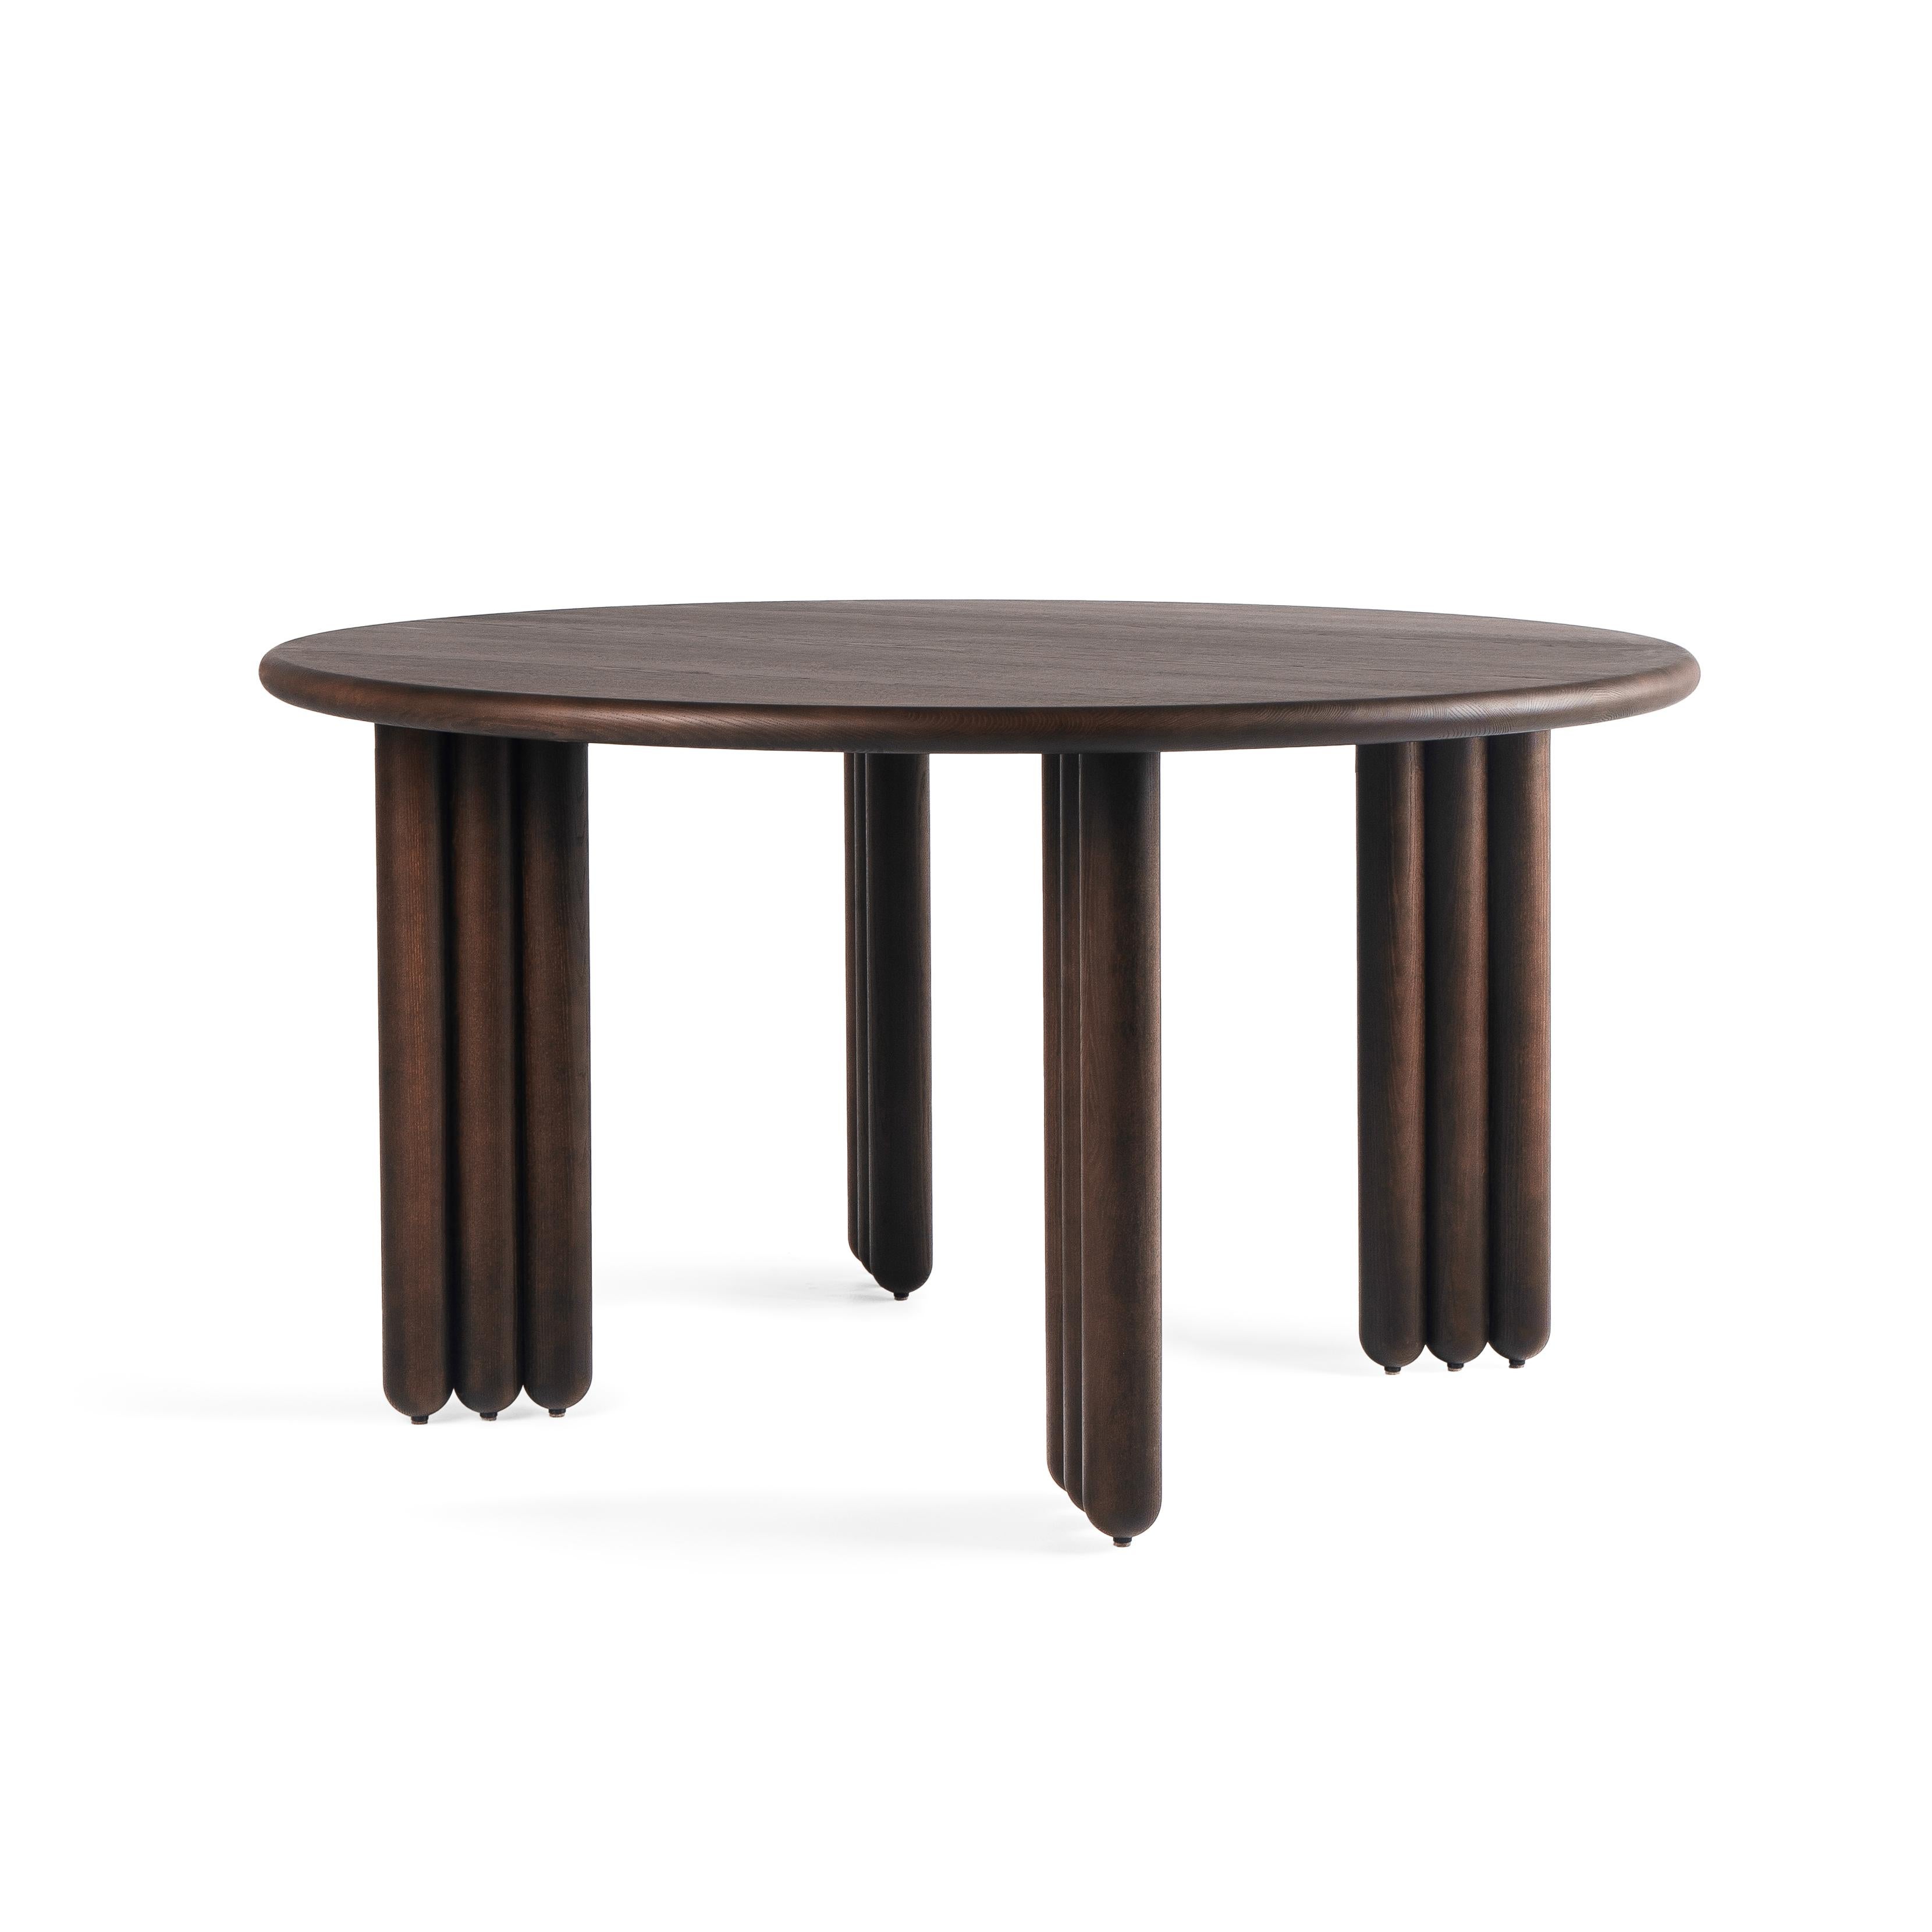 Ukrainian Contemporary Dining Round Table 'Flock' by Noom, 180 cm For Sale